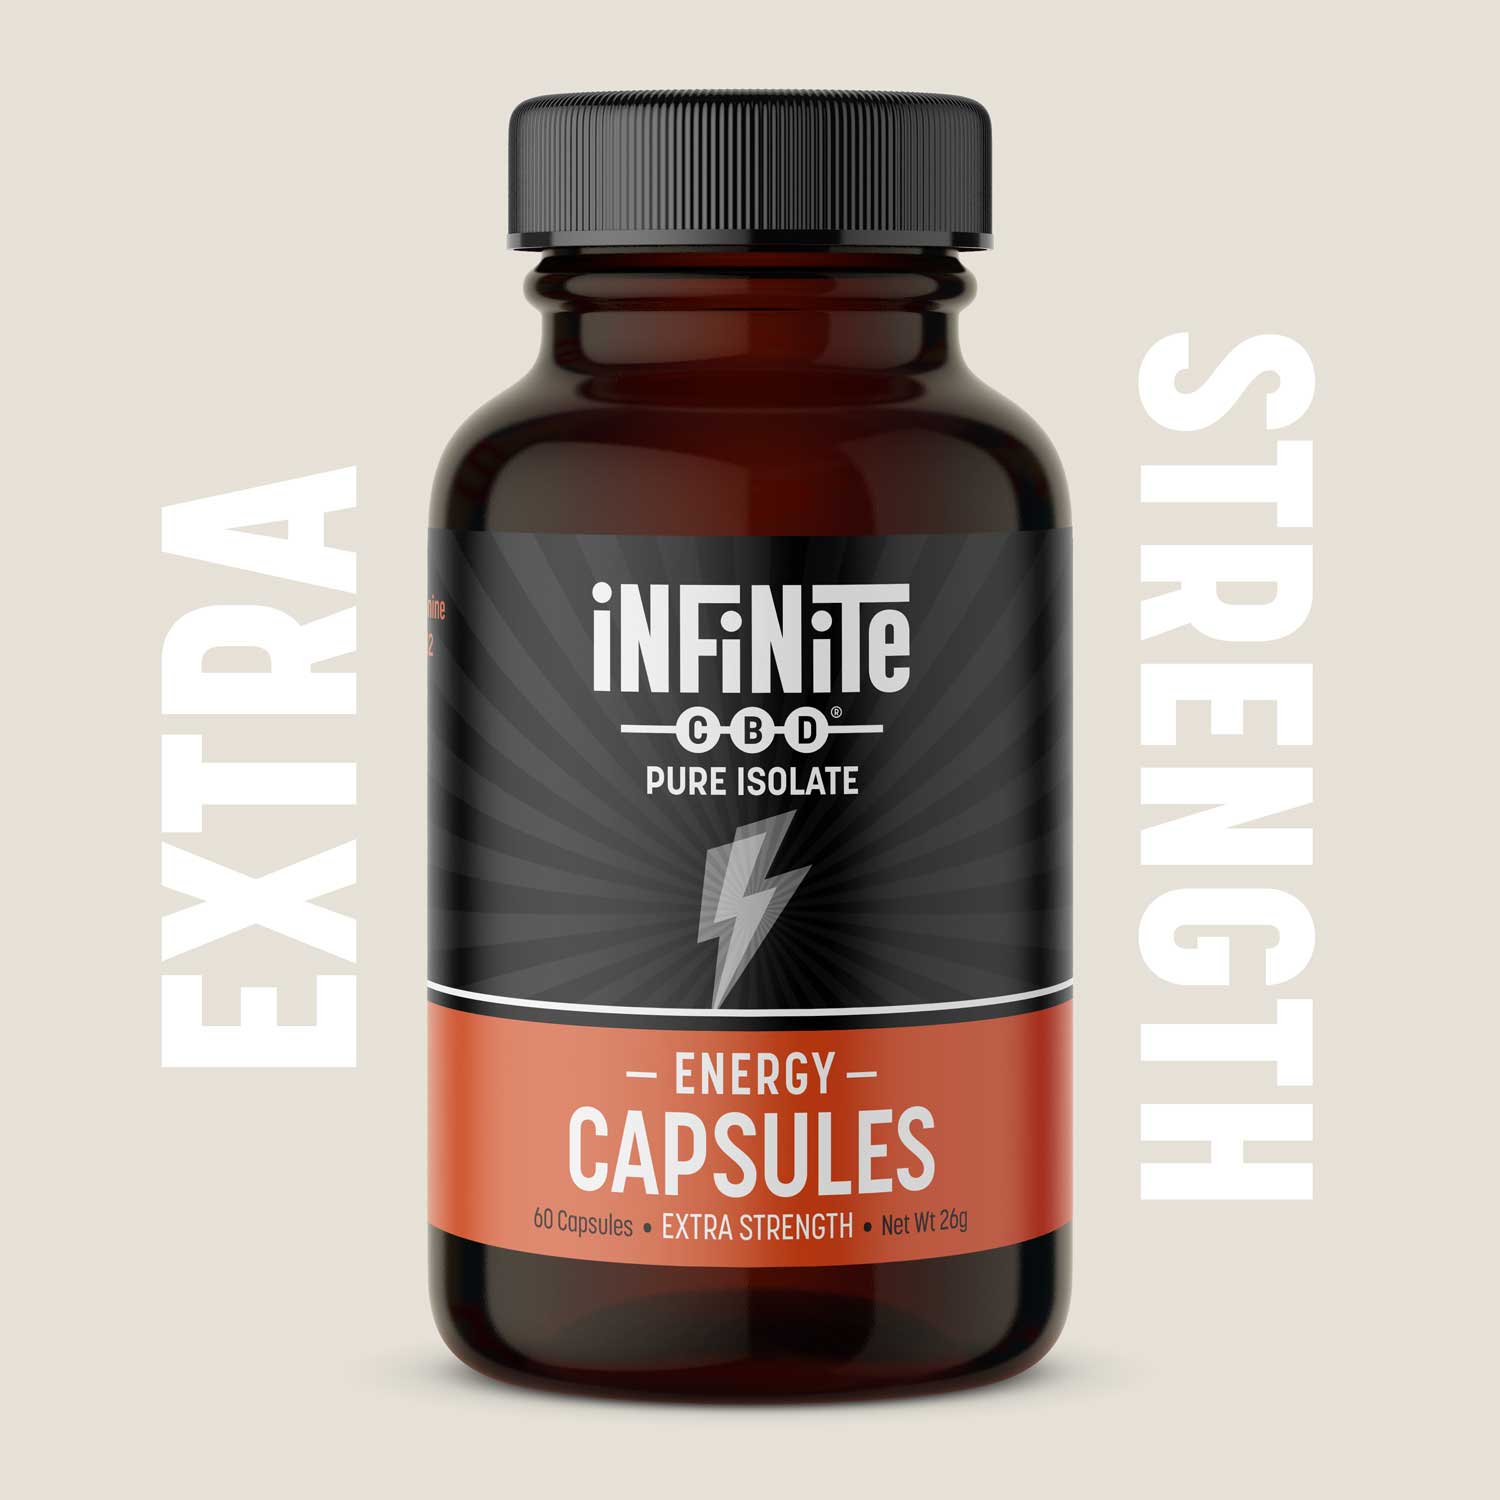 Capsules<br>Formulation: Energy<br>CBD: Pure Isolate (Zero THC)<br>Strength: Extra (40mg/serving)